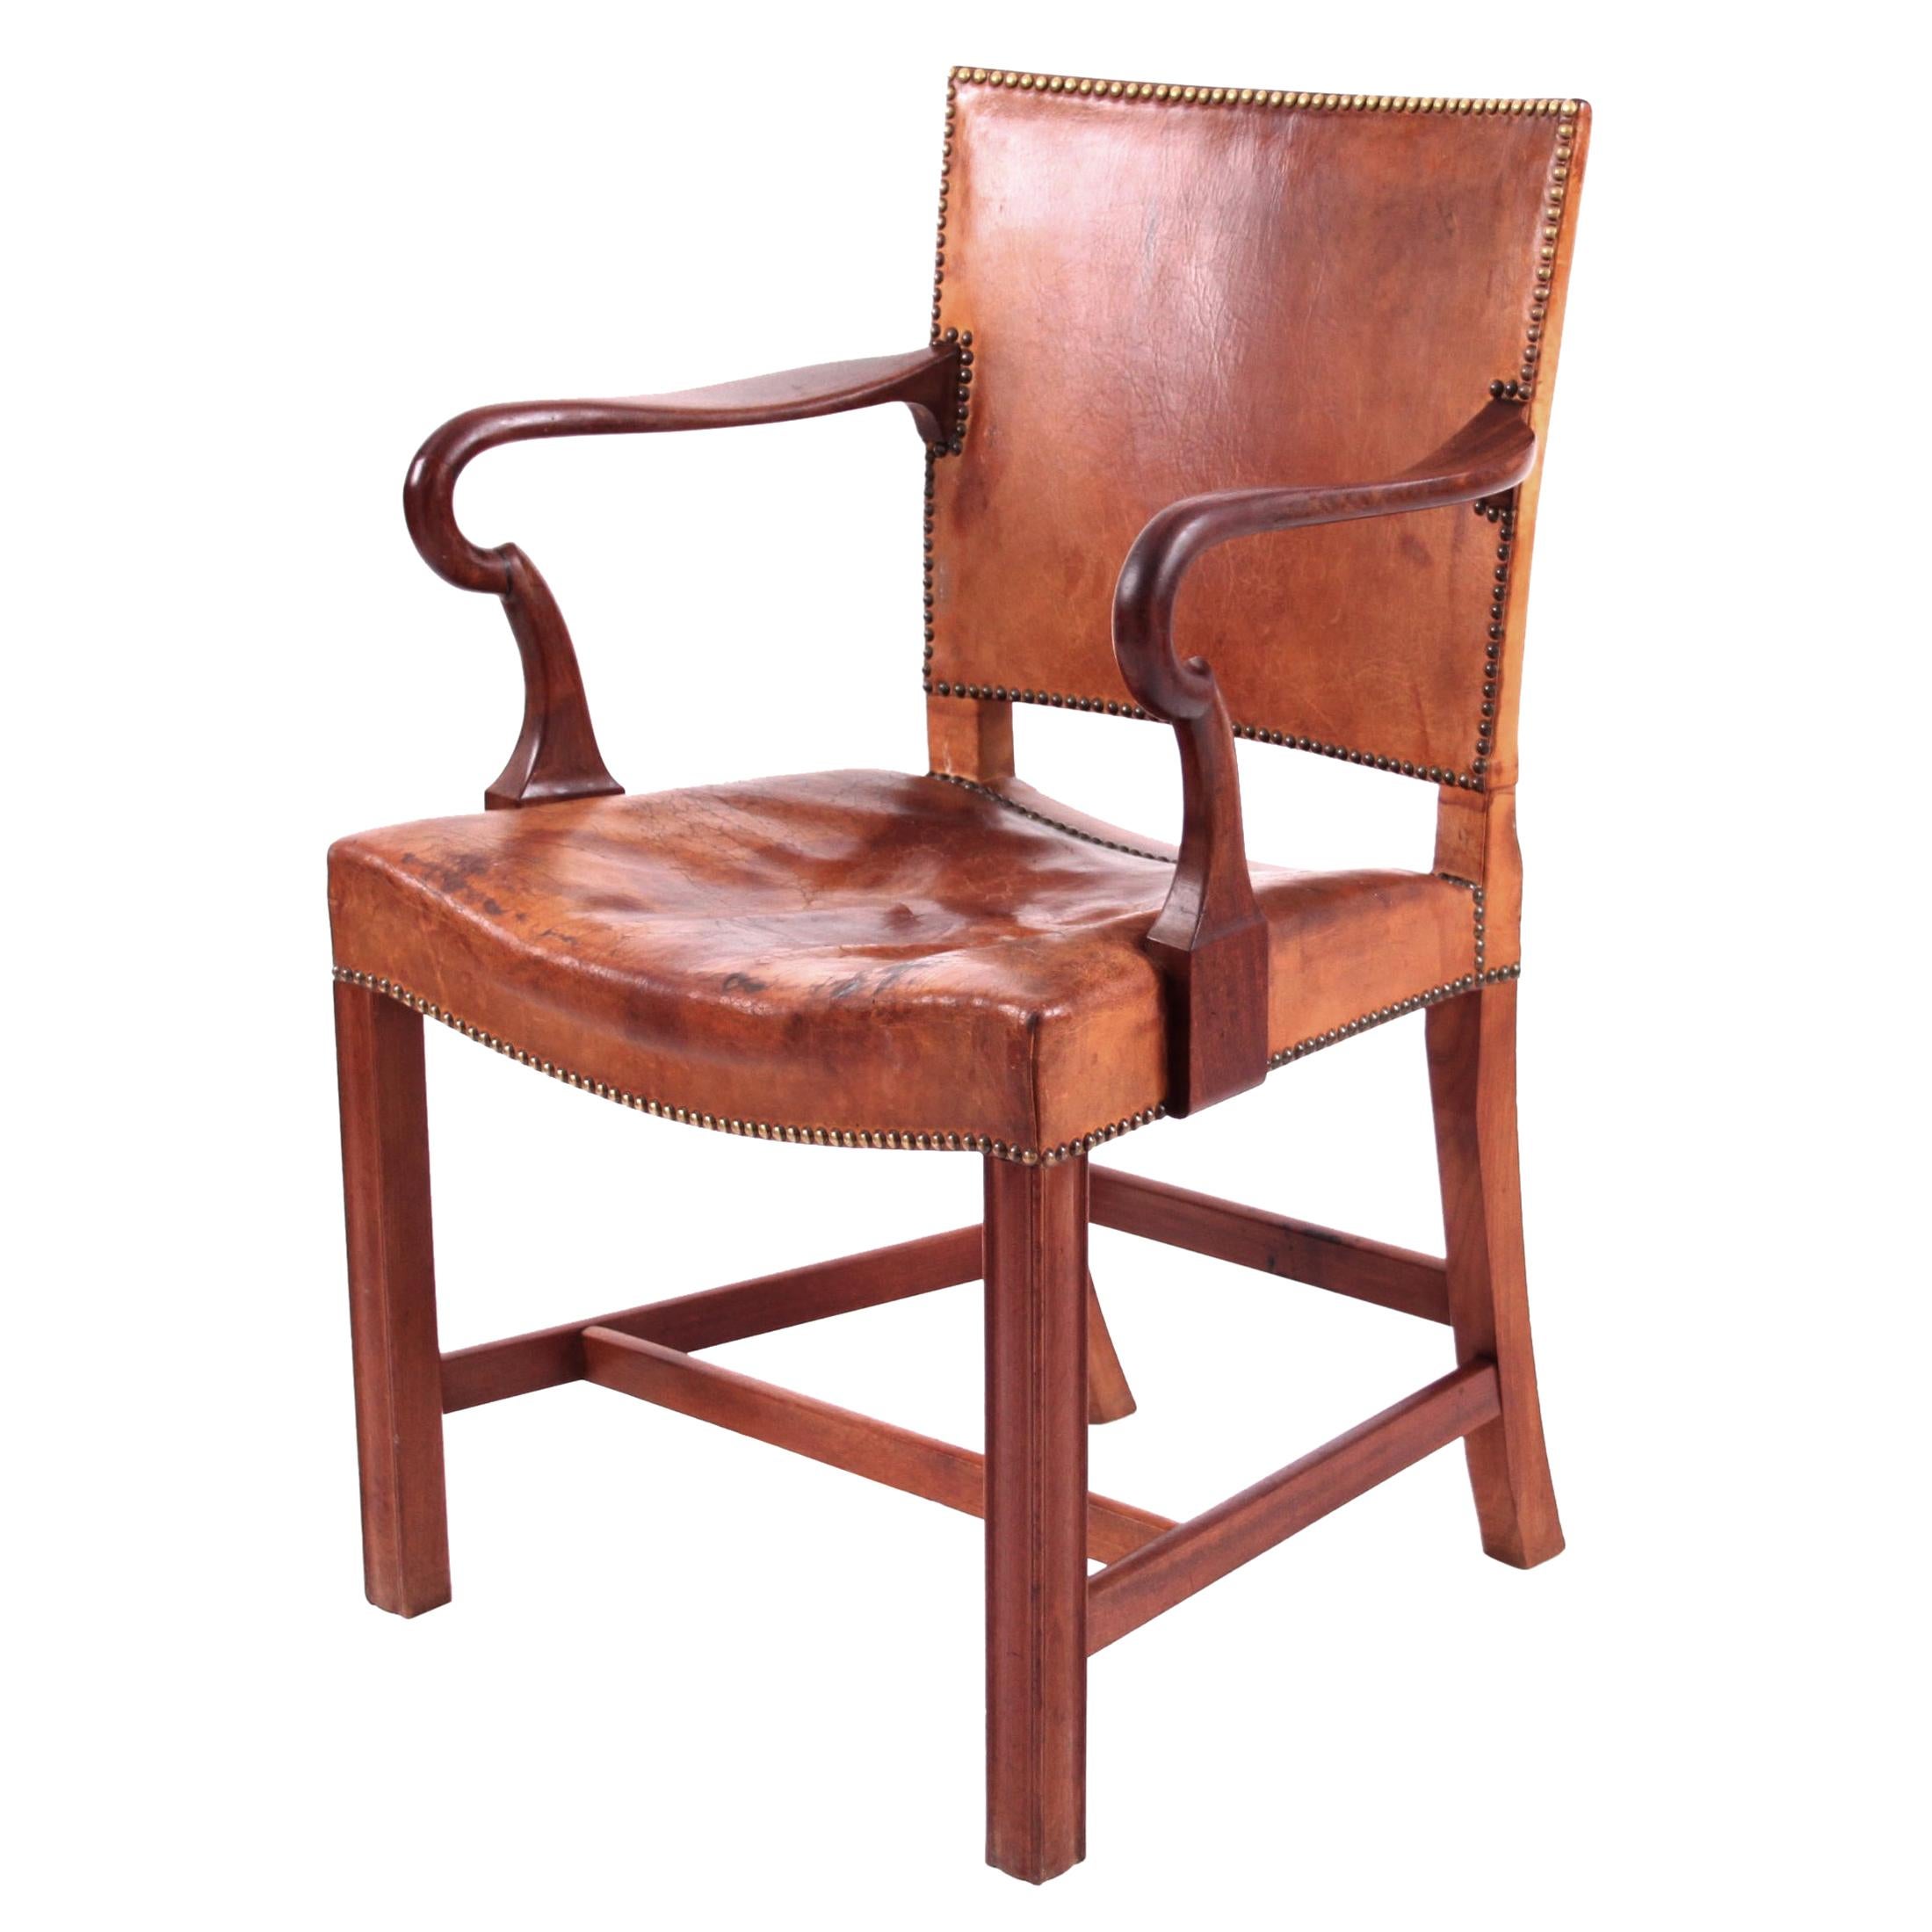 Kaare Klint and Ole Wanscher, Rare Armchair in Niger Leather and Mahogany Frame